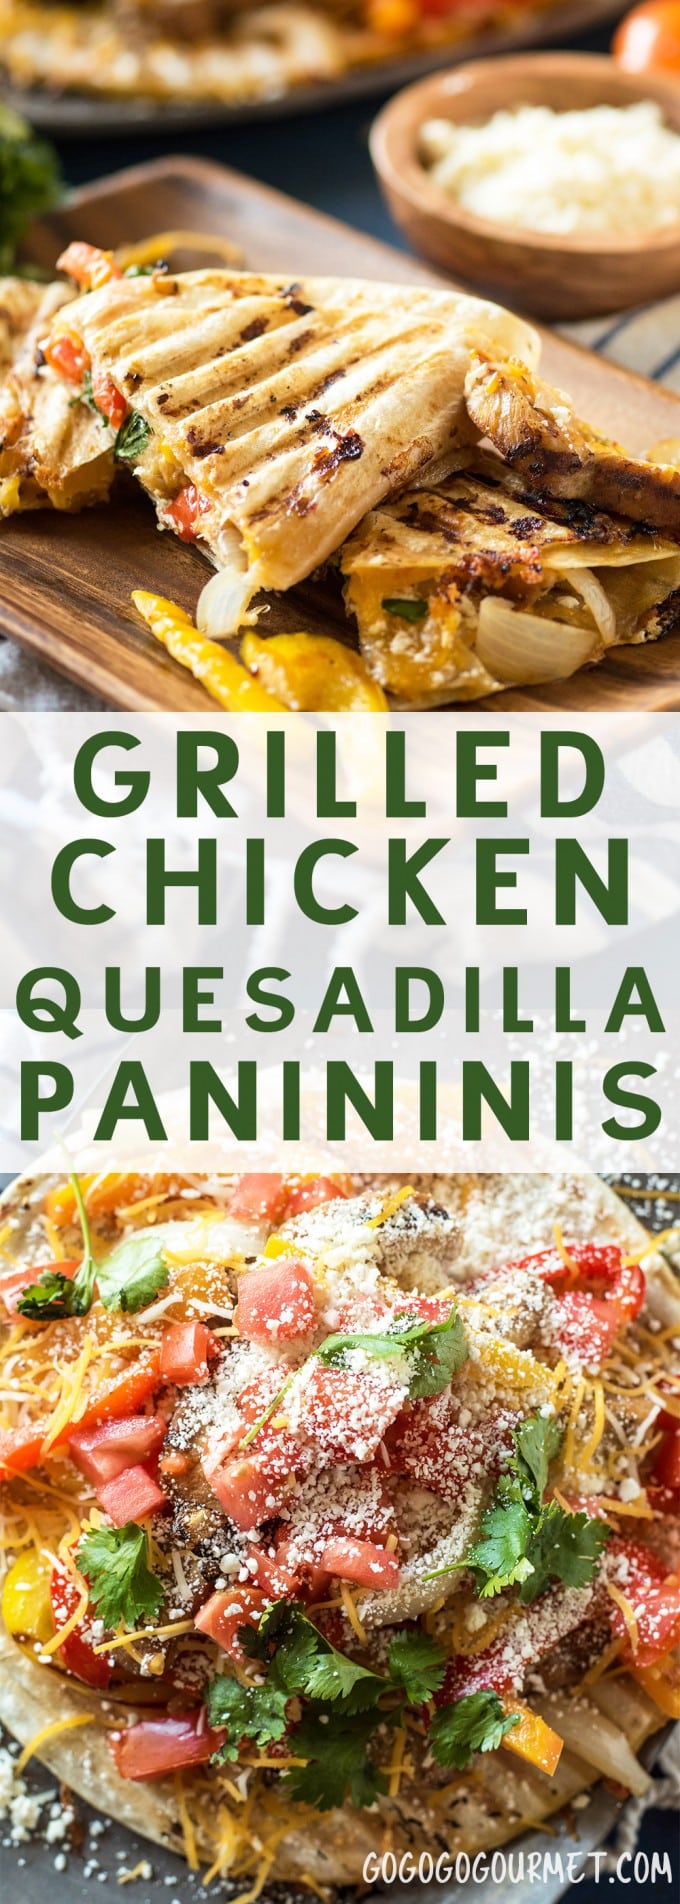 Grilled Chicken Quesadilla Paninis are a fast and easy dinner, ready in under 20 minutes and leave you with no dishes to clean at the end! #gogogogourmet #grilledchickenquesadilla #grilledchickenpanini via @gogogogourmet